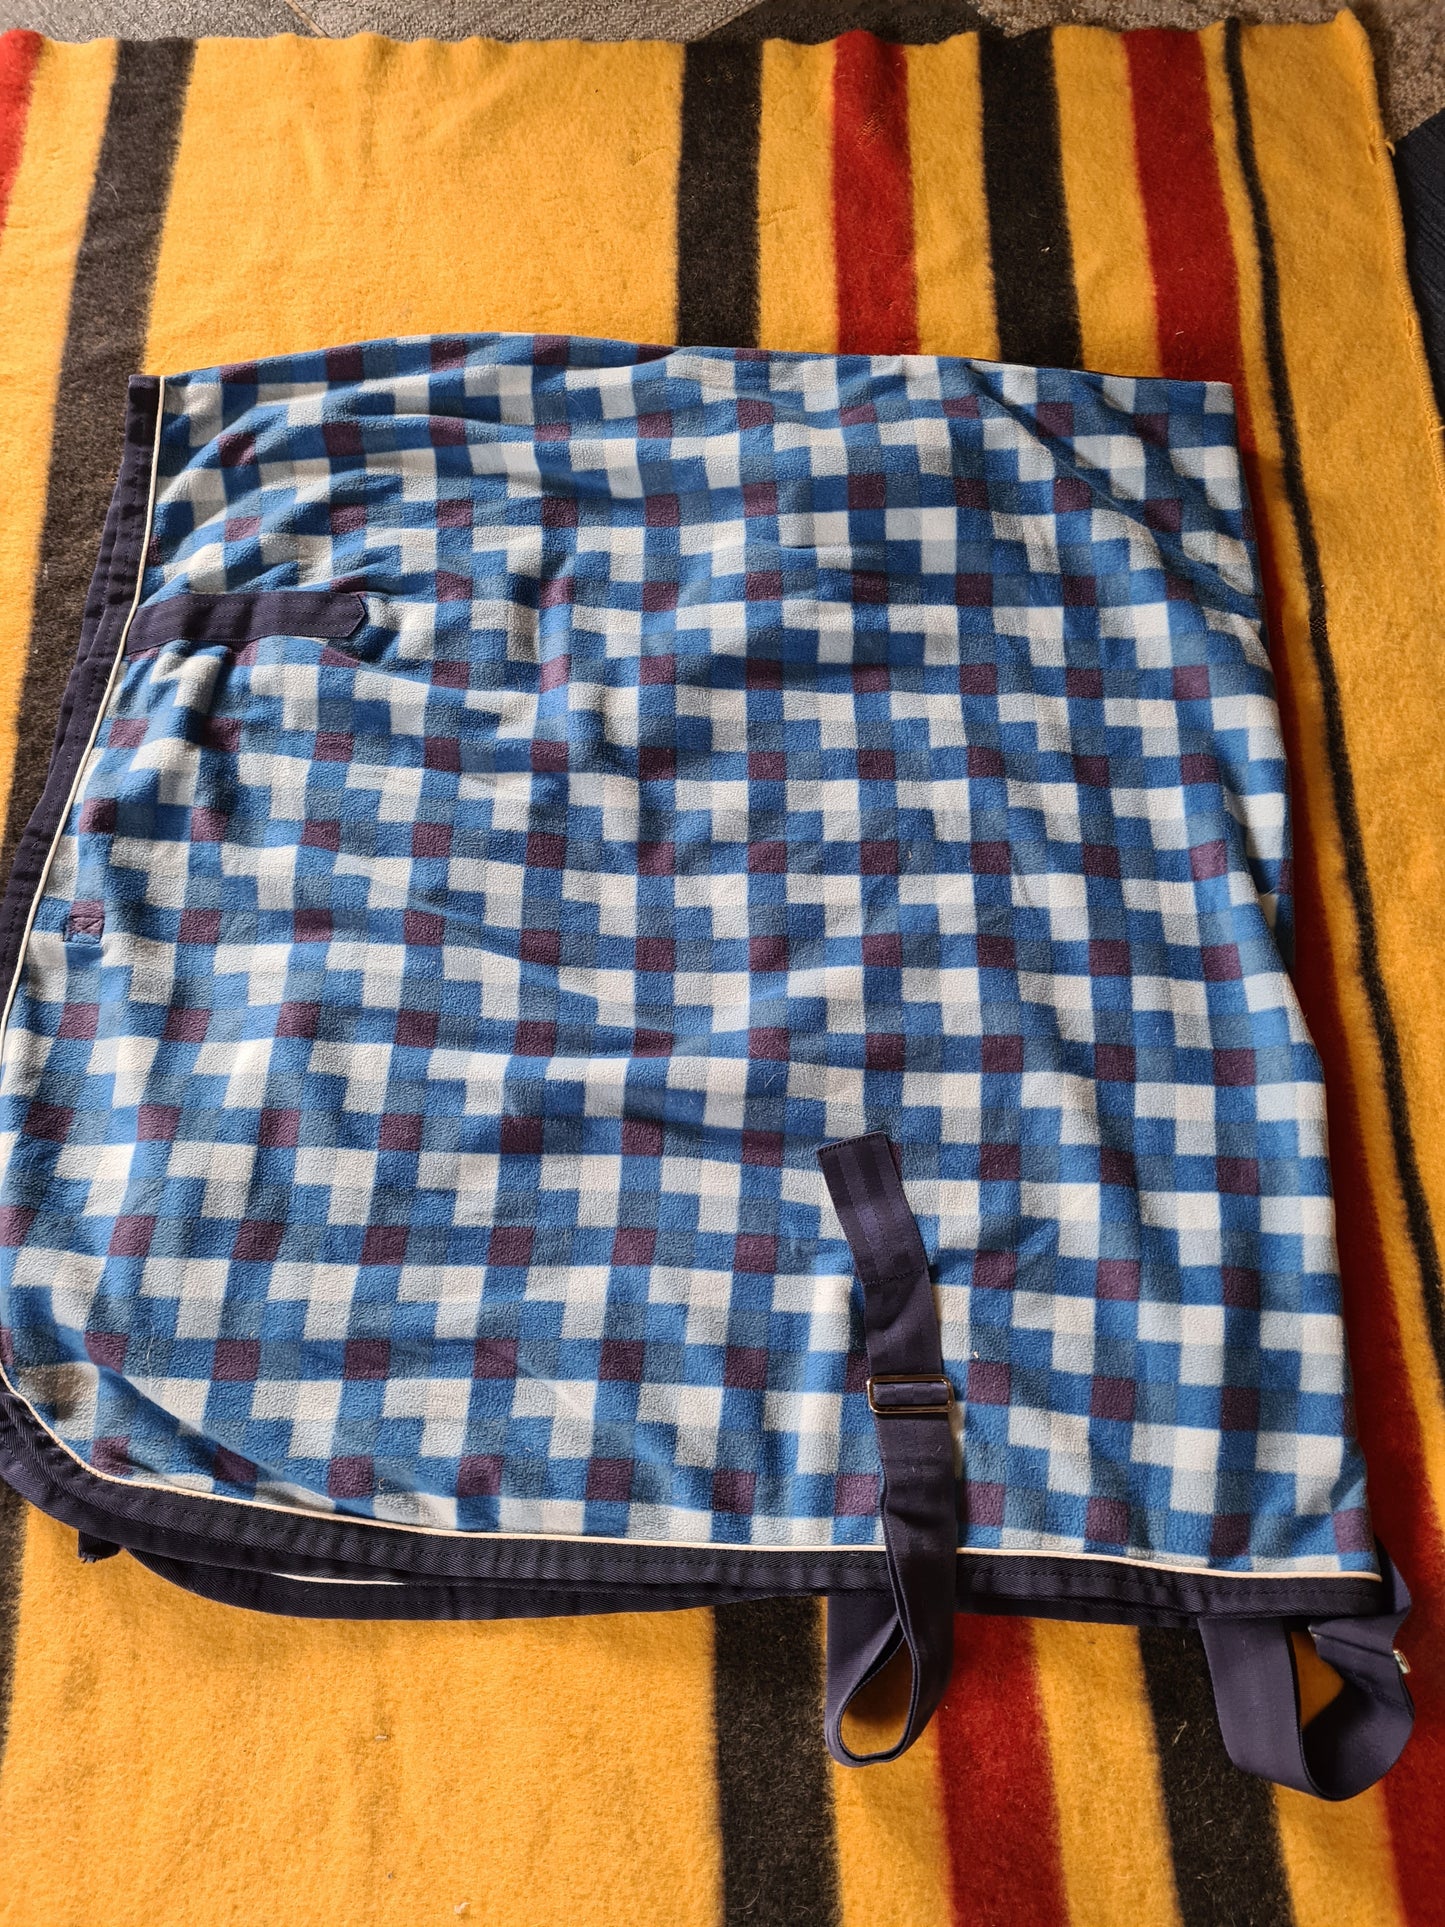 Used derby house fleece rug 6ft3 shades of blue check pattern FREE POSTAGE 🟢